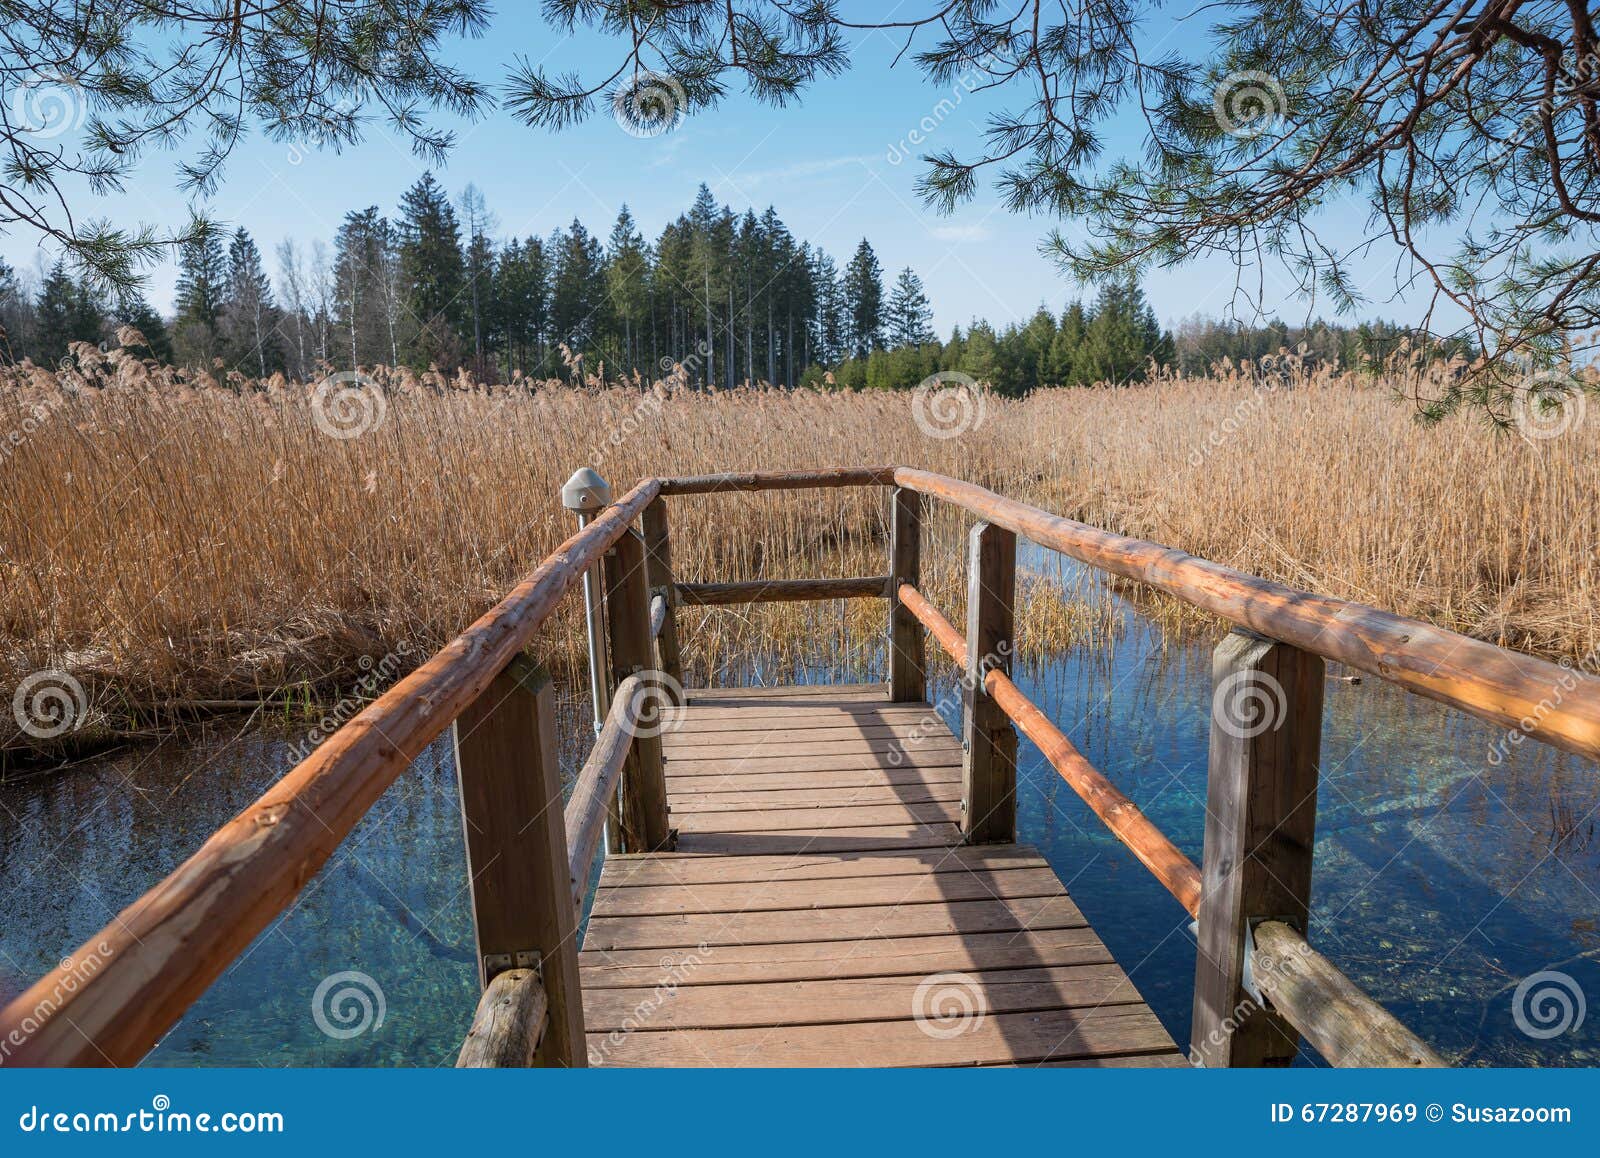 wooden boardwalk with view to blue fount in the swamp